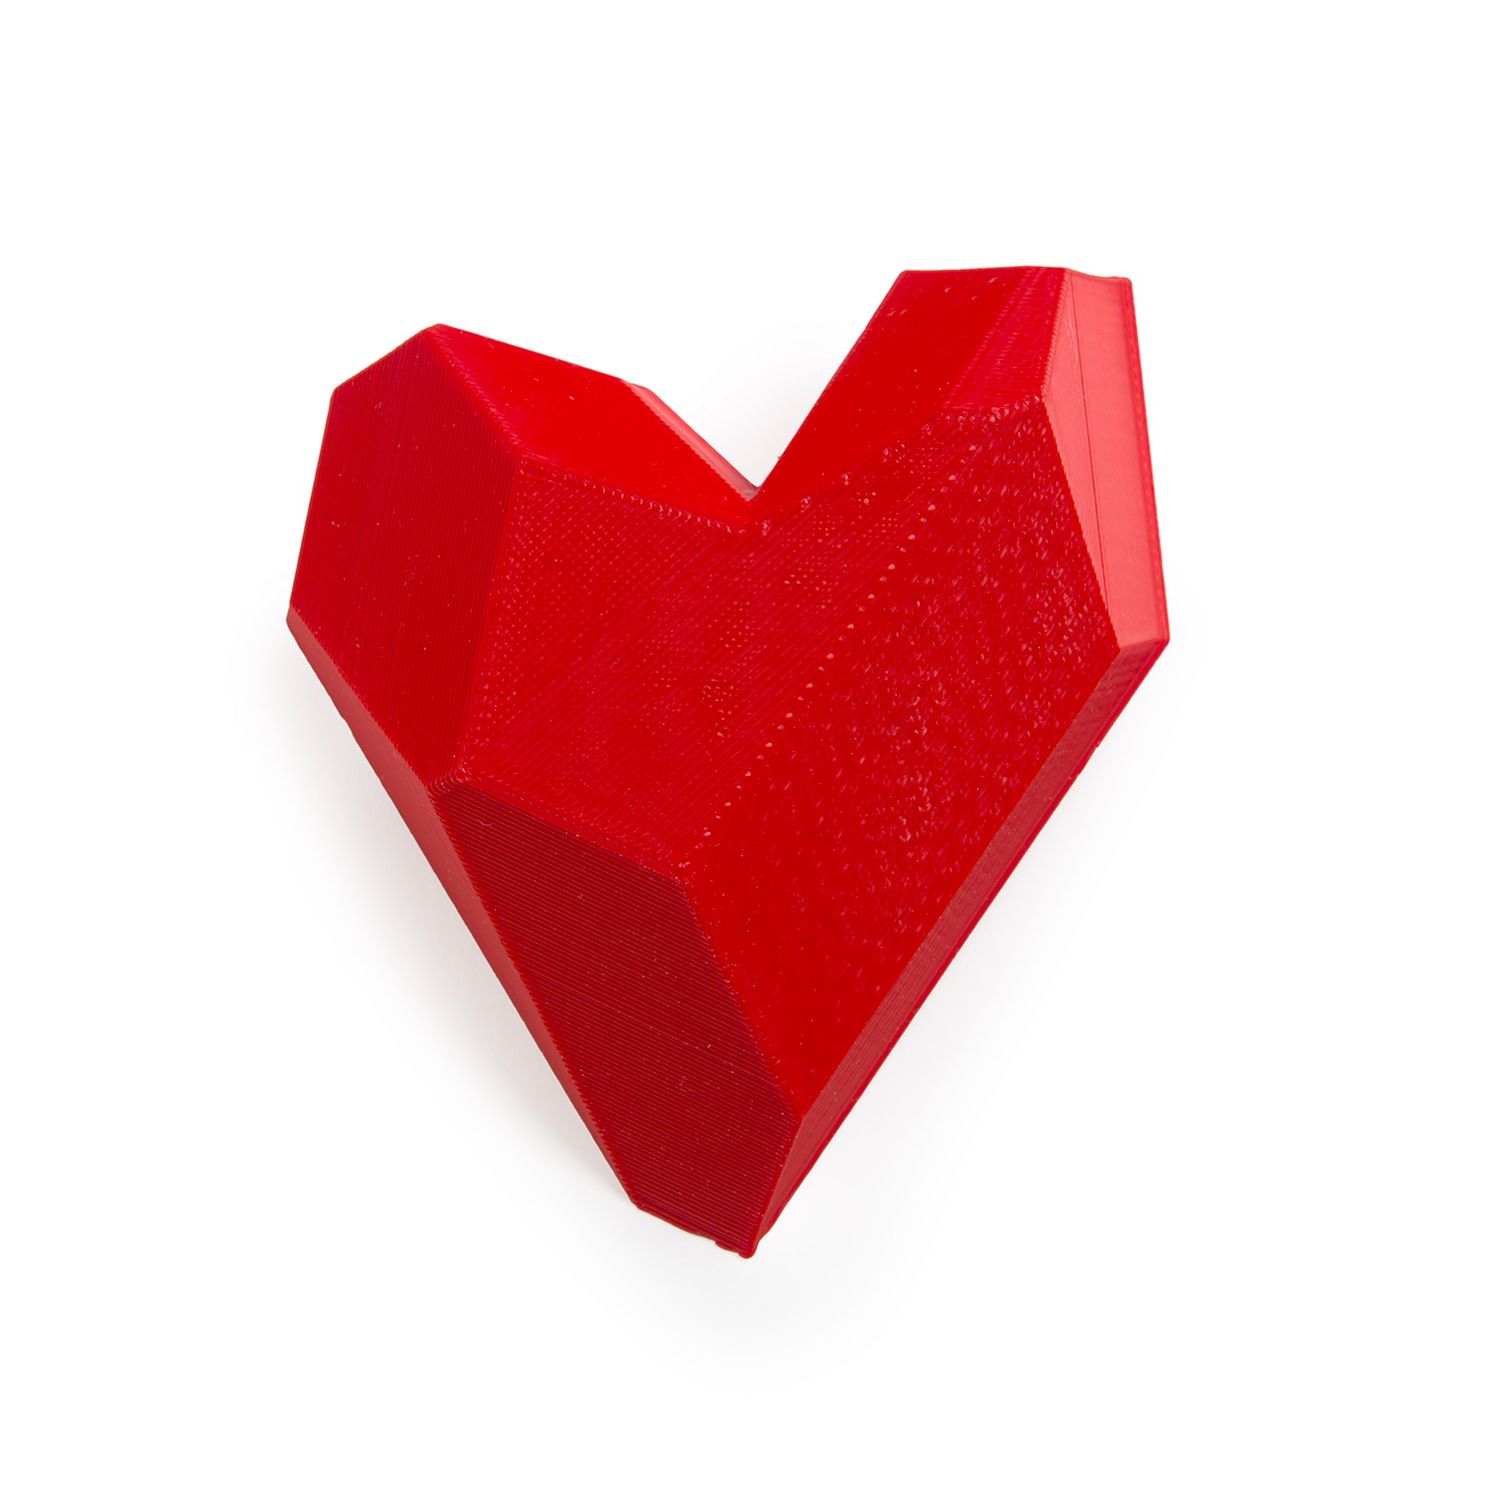 Maison 203: Mini Heart Brooch – Red Product Image 1 of 3